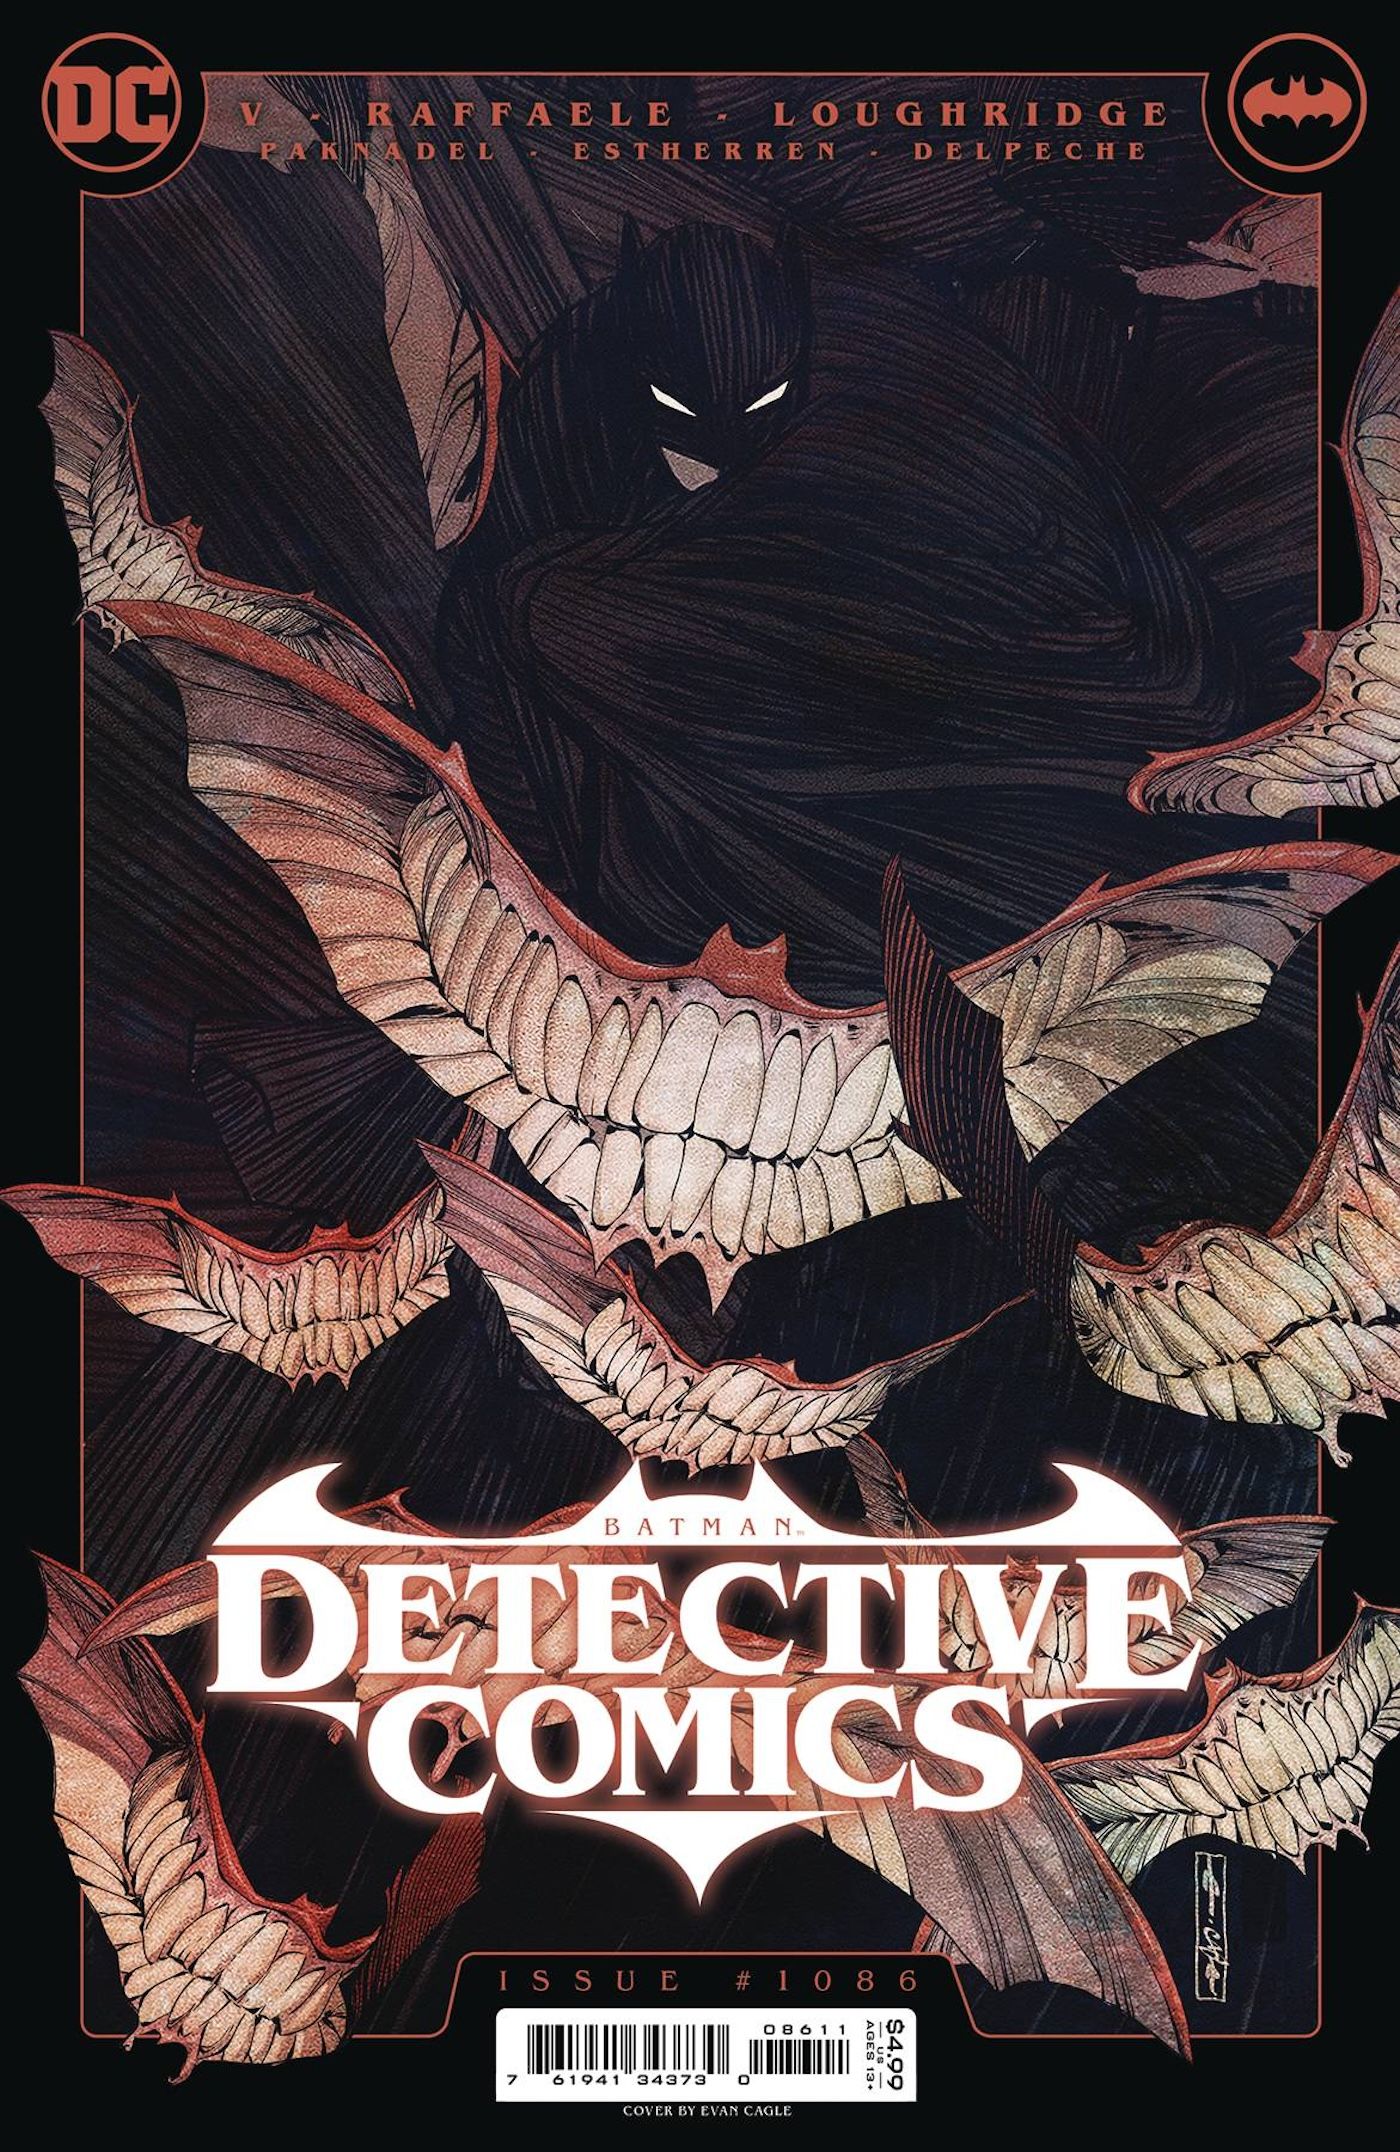 Detective Comics 1086 Main Cover: Batman in shadows surrounded by smiles in bat shapes.